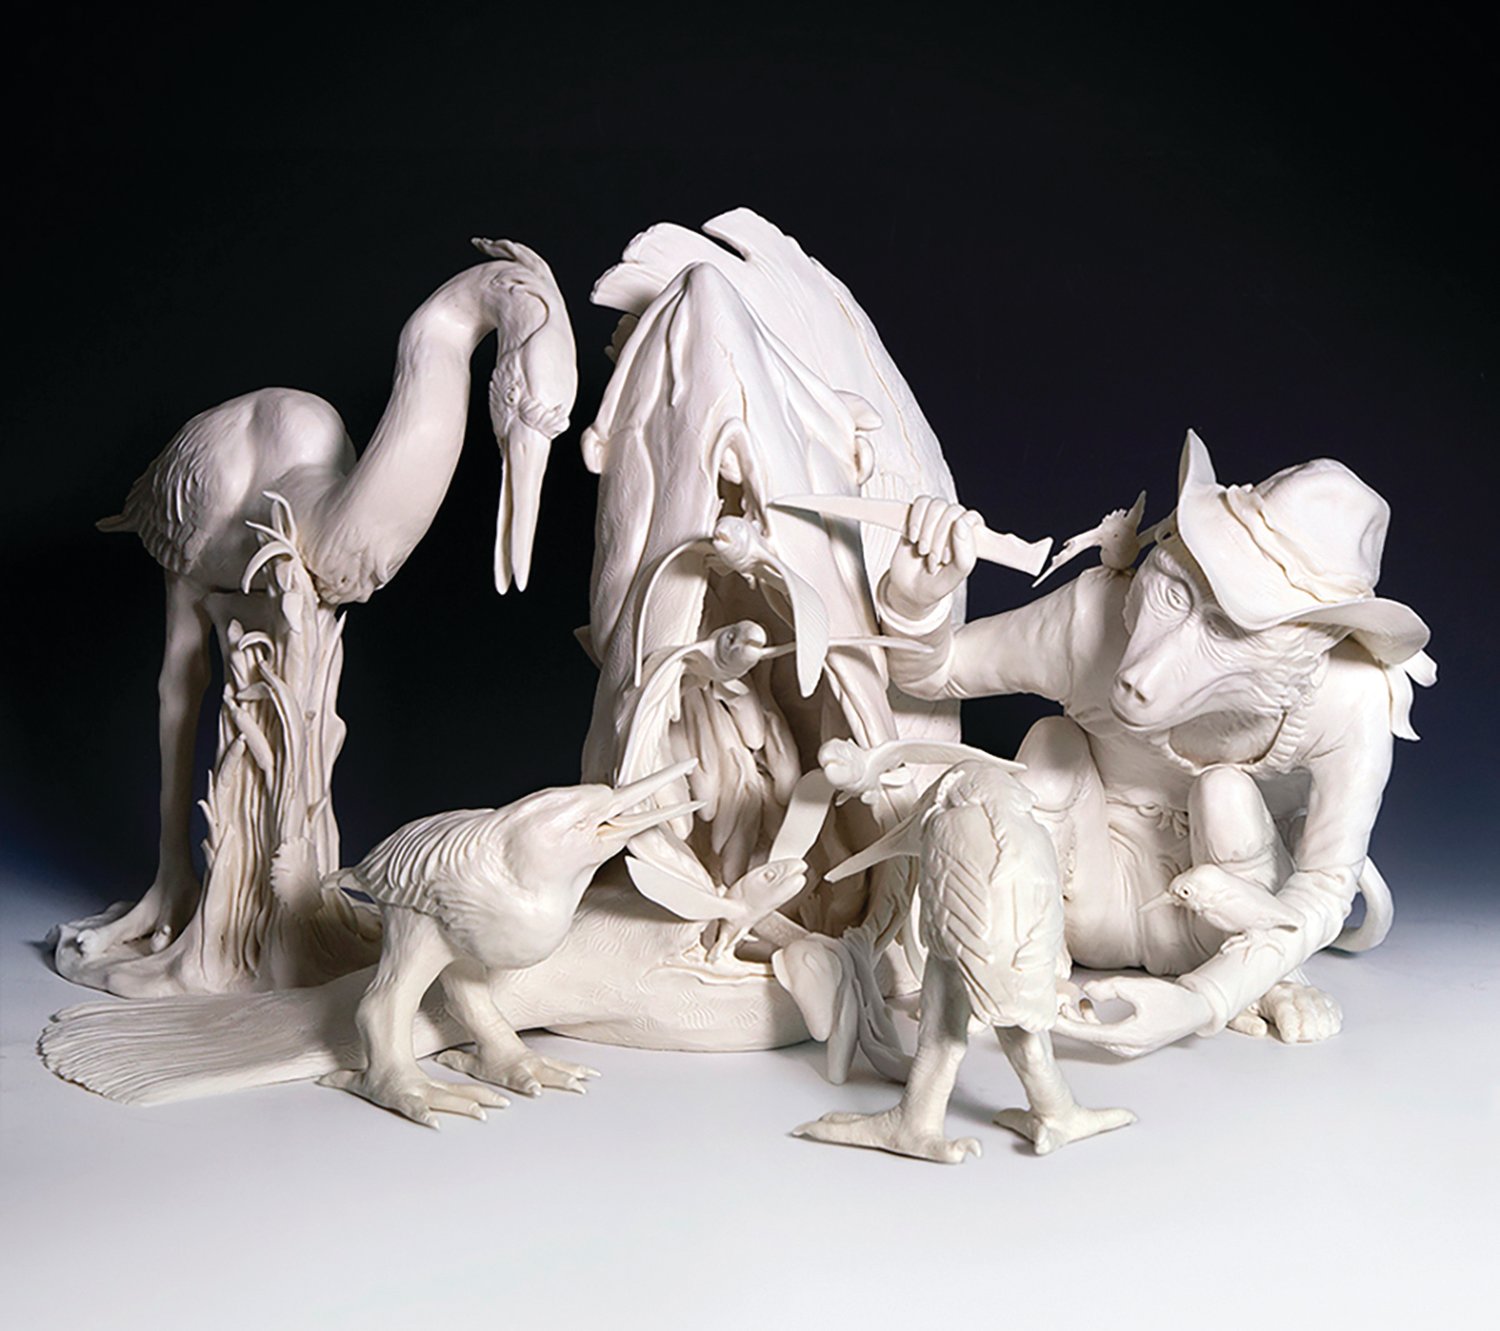 Courtesy of the artist
“Liberality” is a porcelain work by Tricia Zimic, in which a baboon is shown opening a fish to feed nearby birds, symbolizing the virtue of pure generosity and openhandedness. It is part of “Sins & Virtues.”